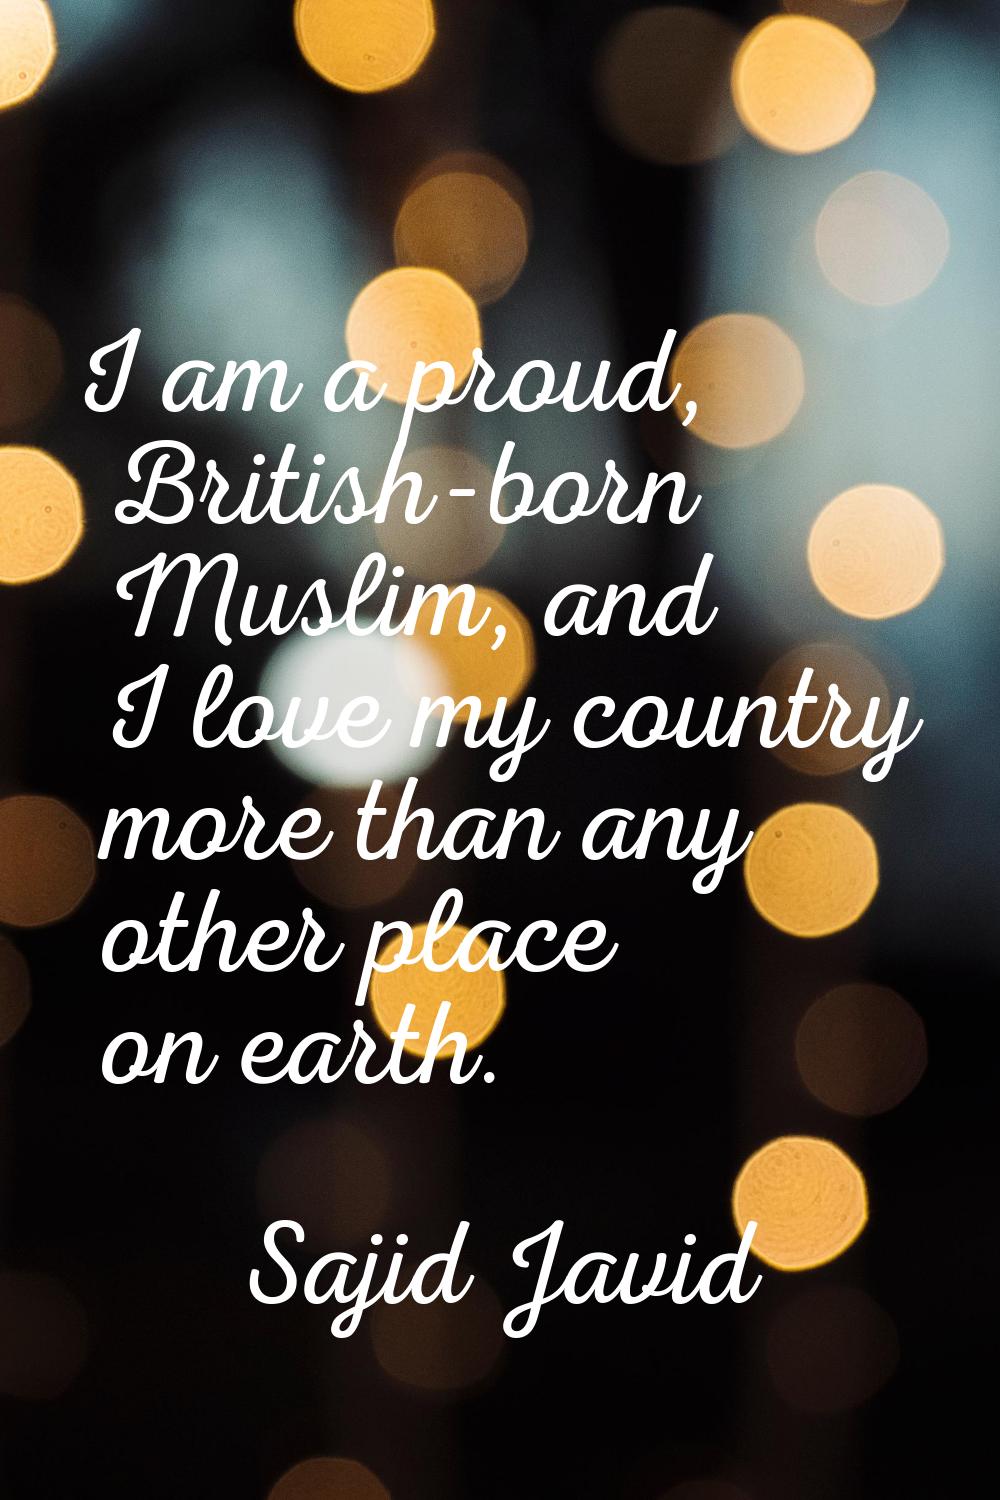 I am a proud, British-born Muslim, and I love my country more than any other place on earth.